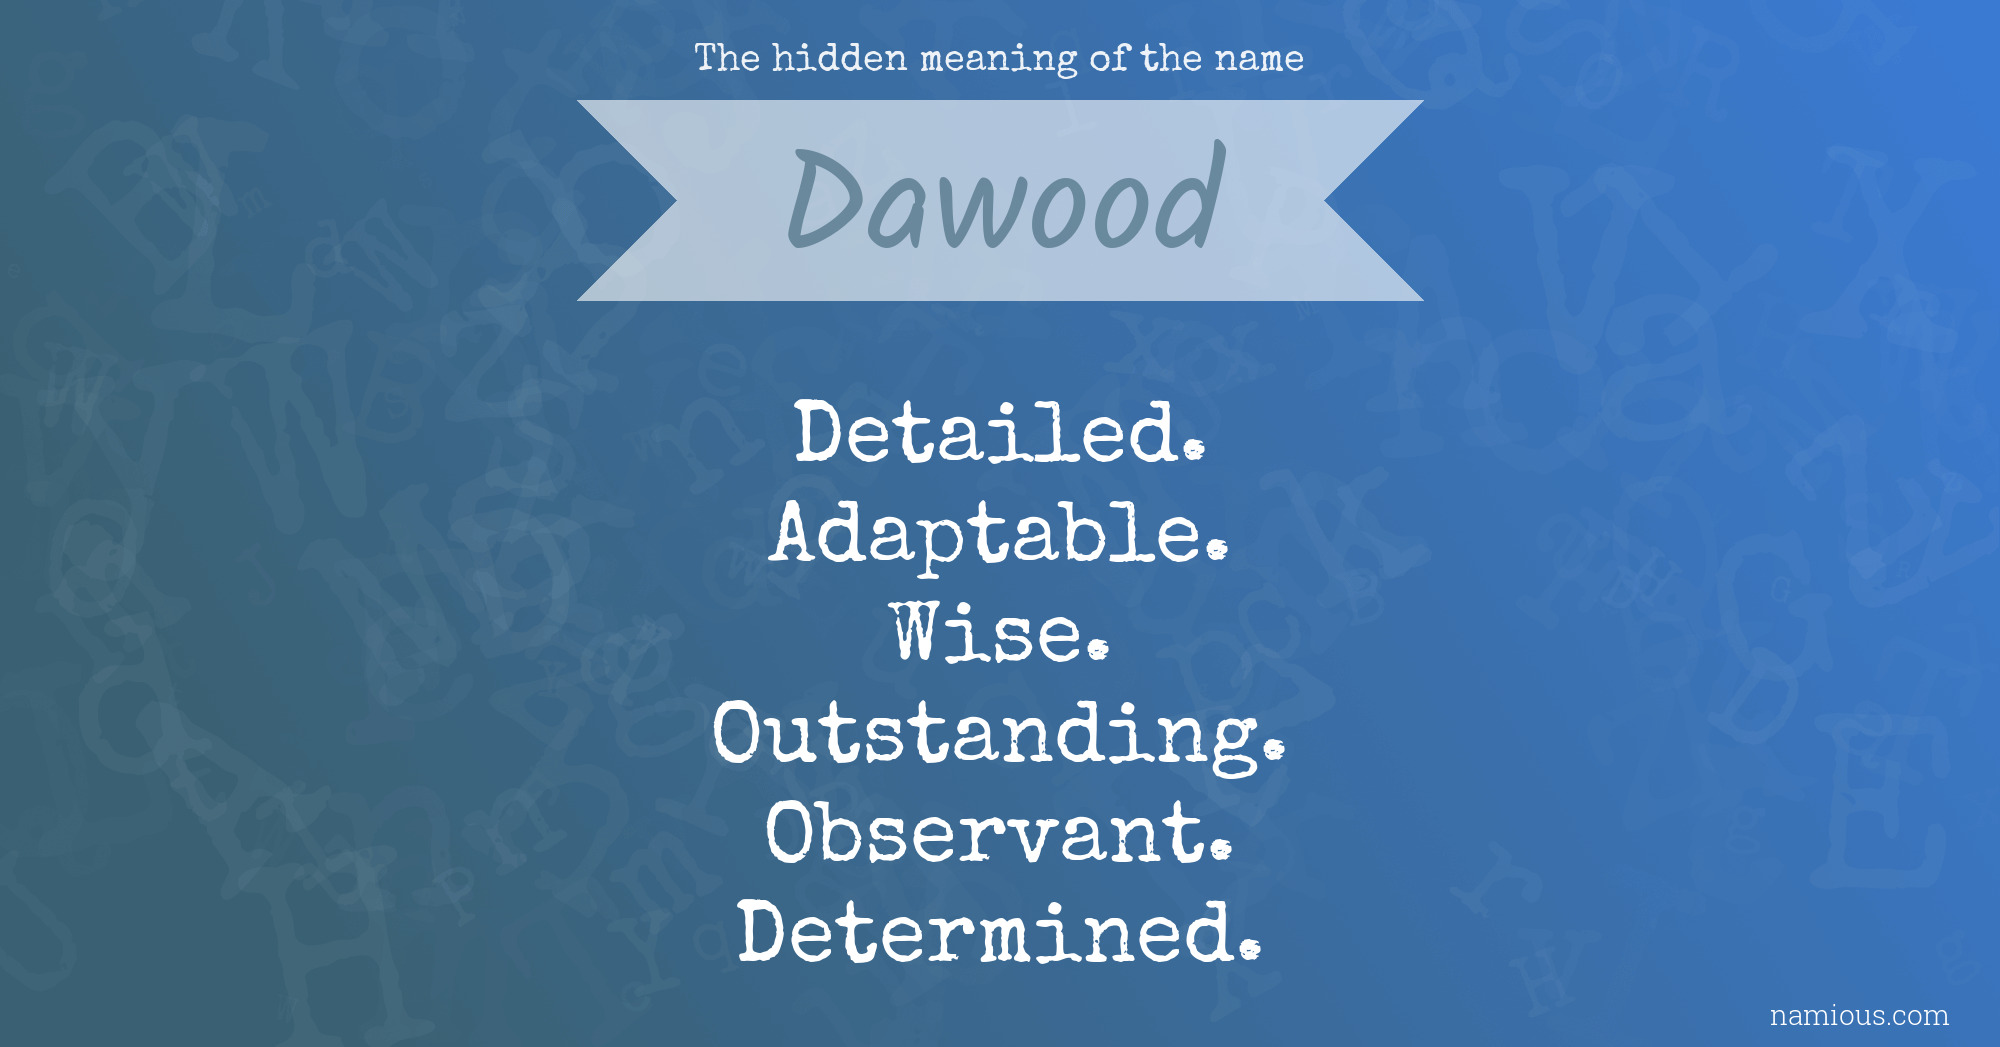 The hidden meaning of the name Dawood